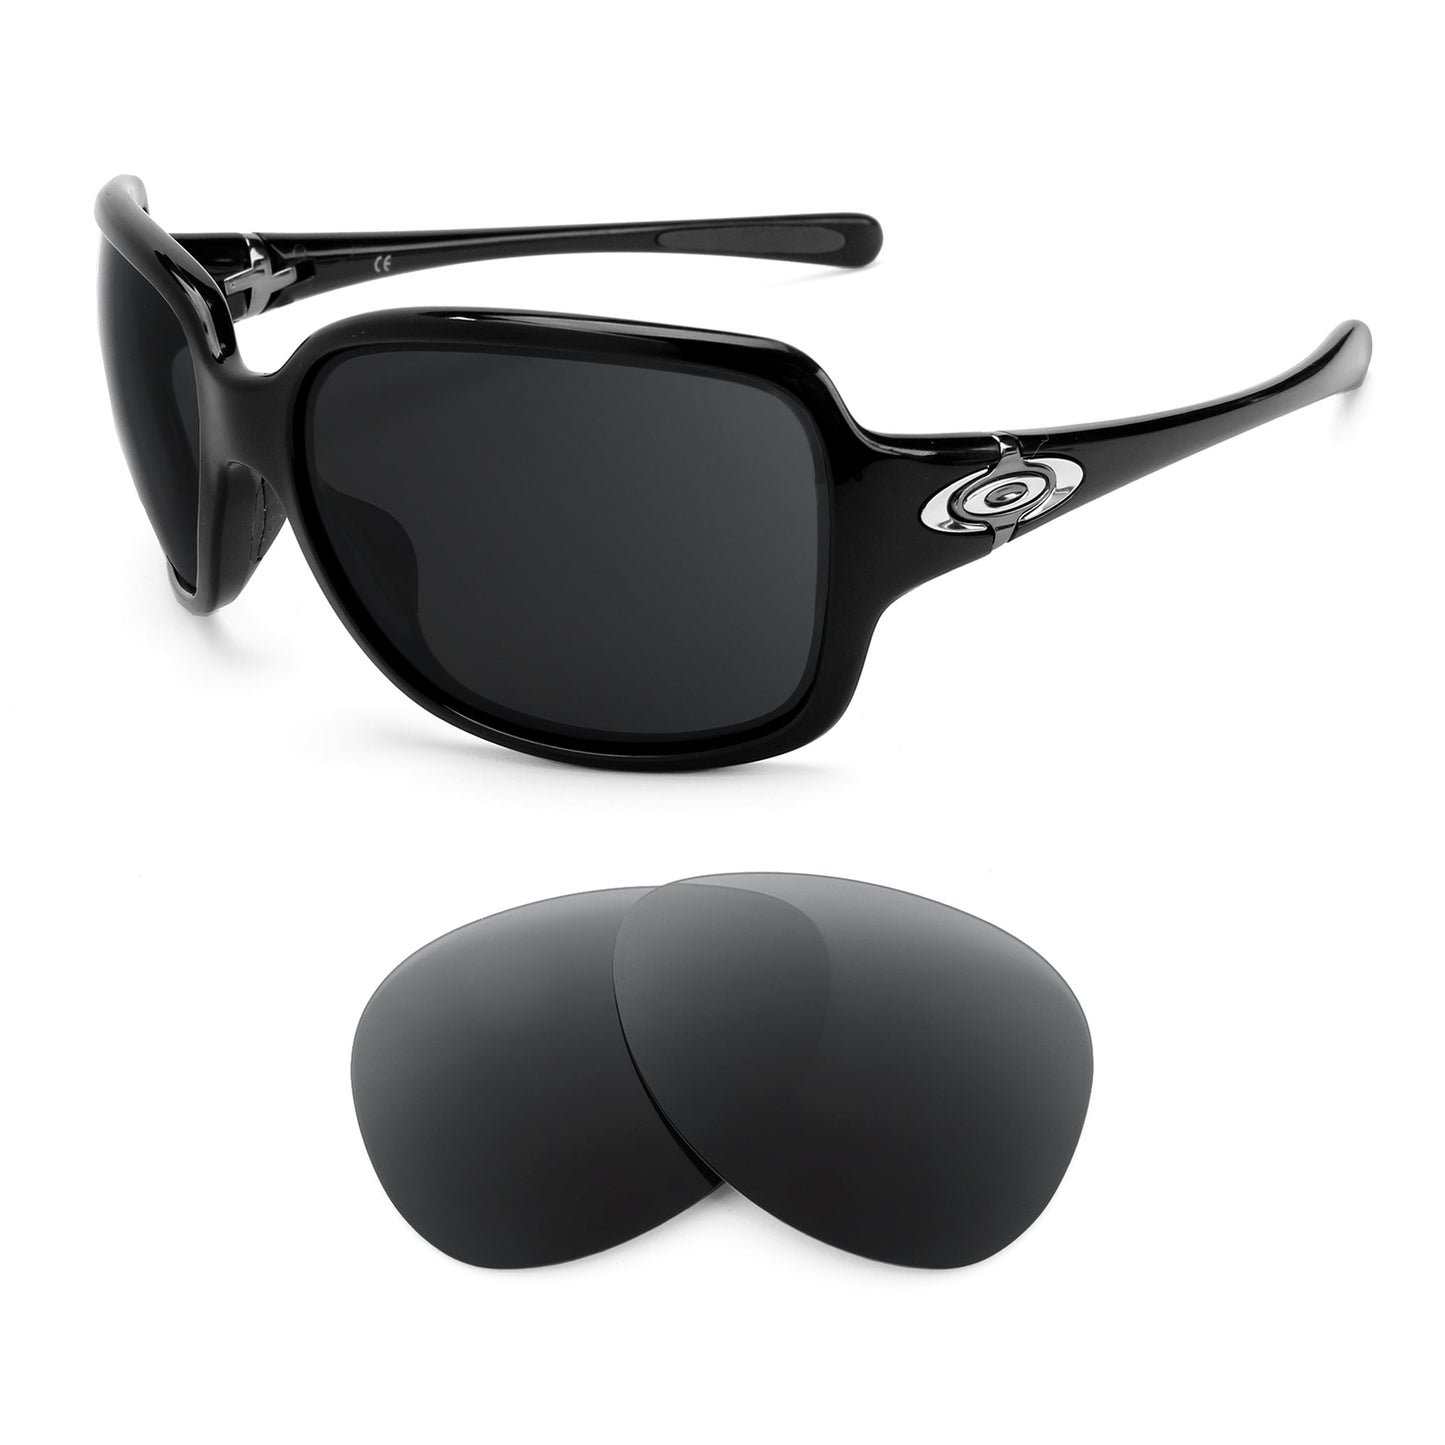 Oakley Break Point sunglasses with replacement lenses